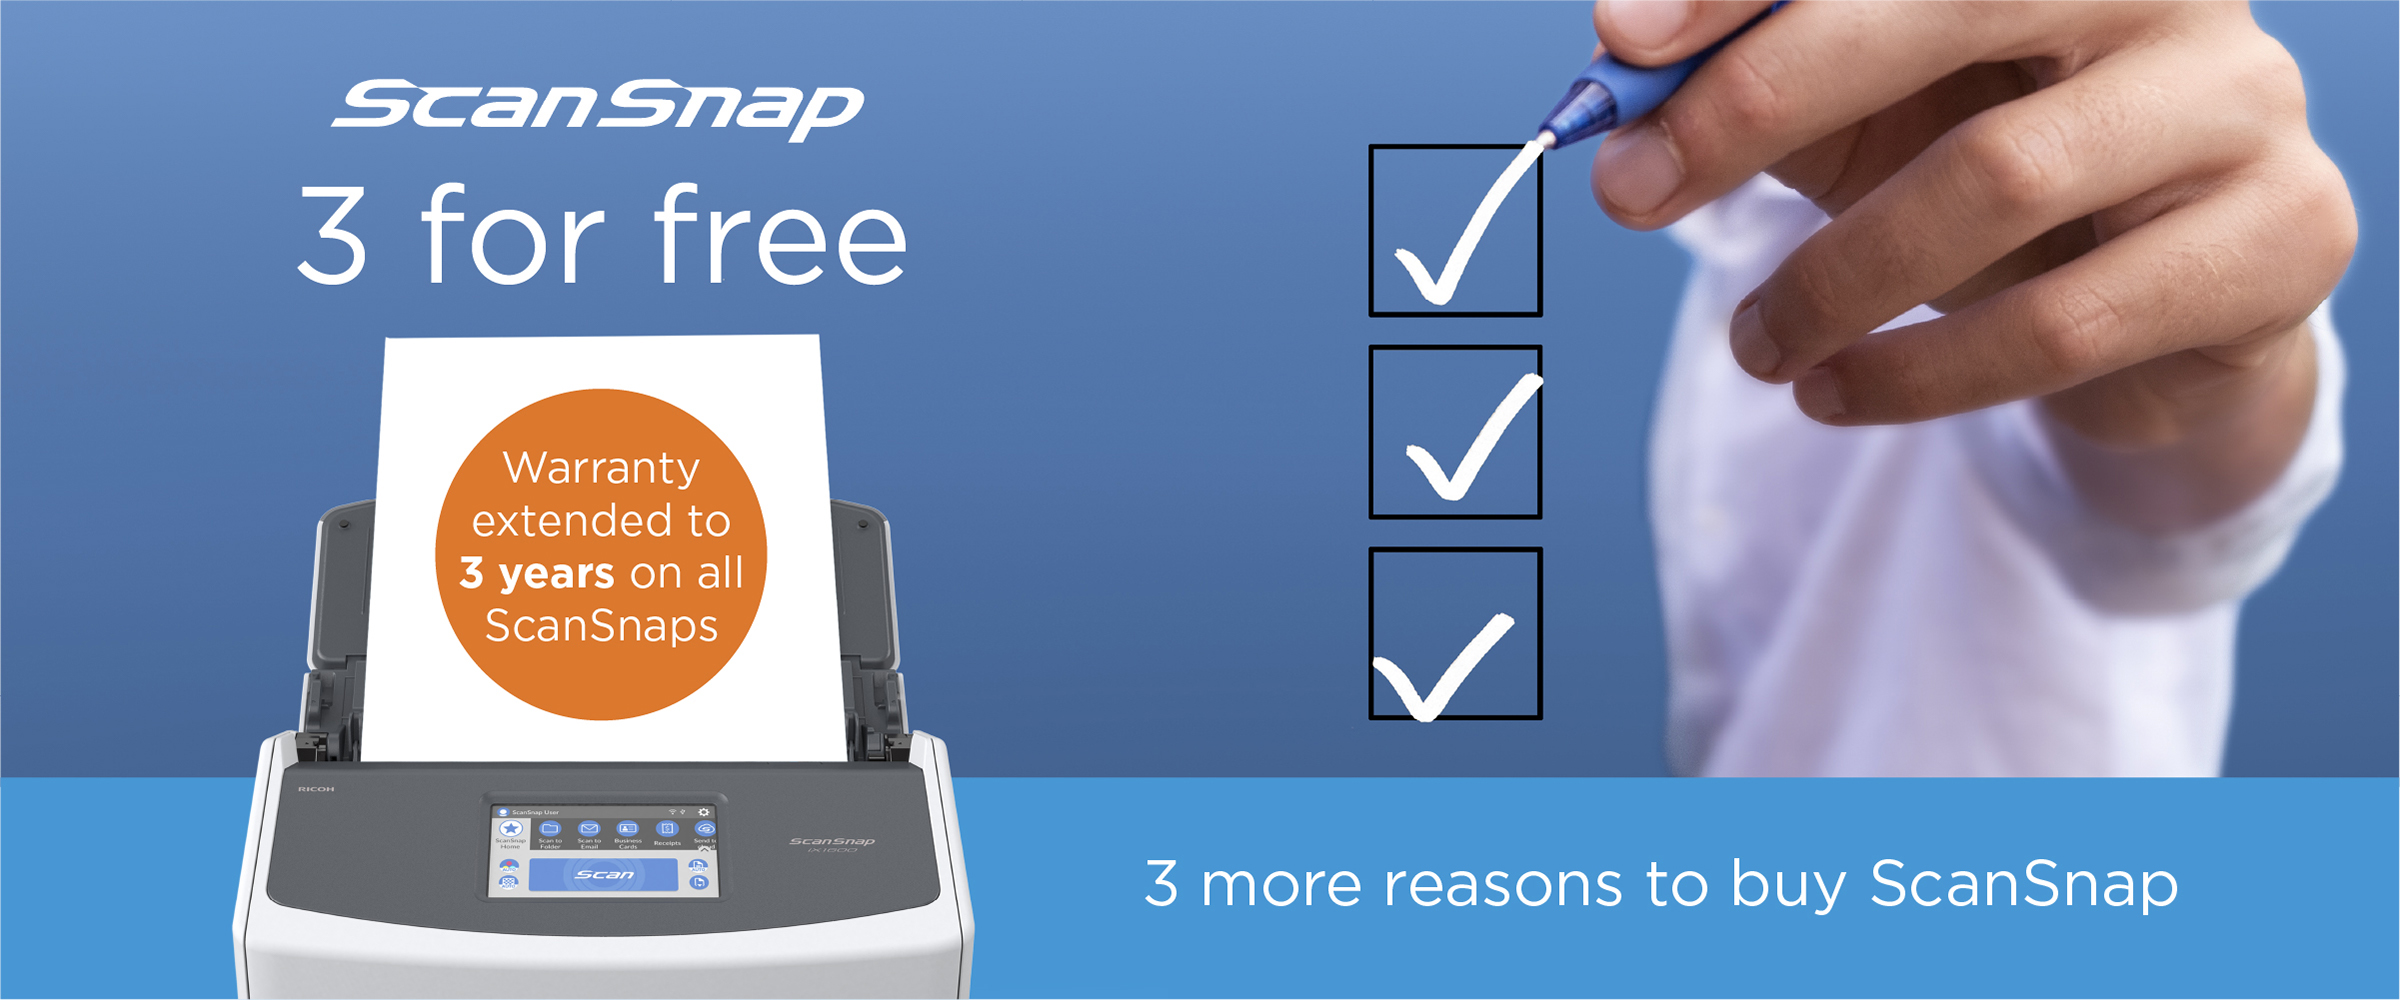 ScanSnap 3 for free promotion